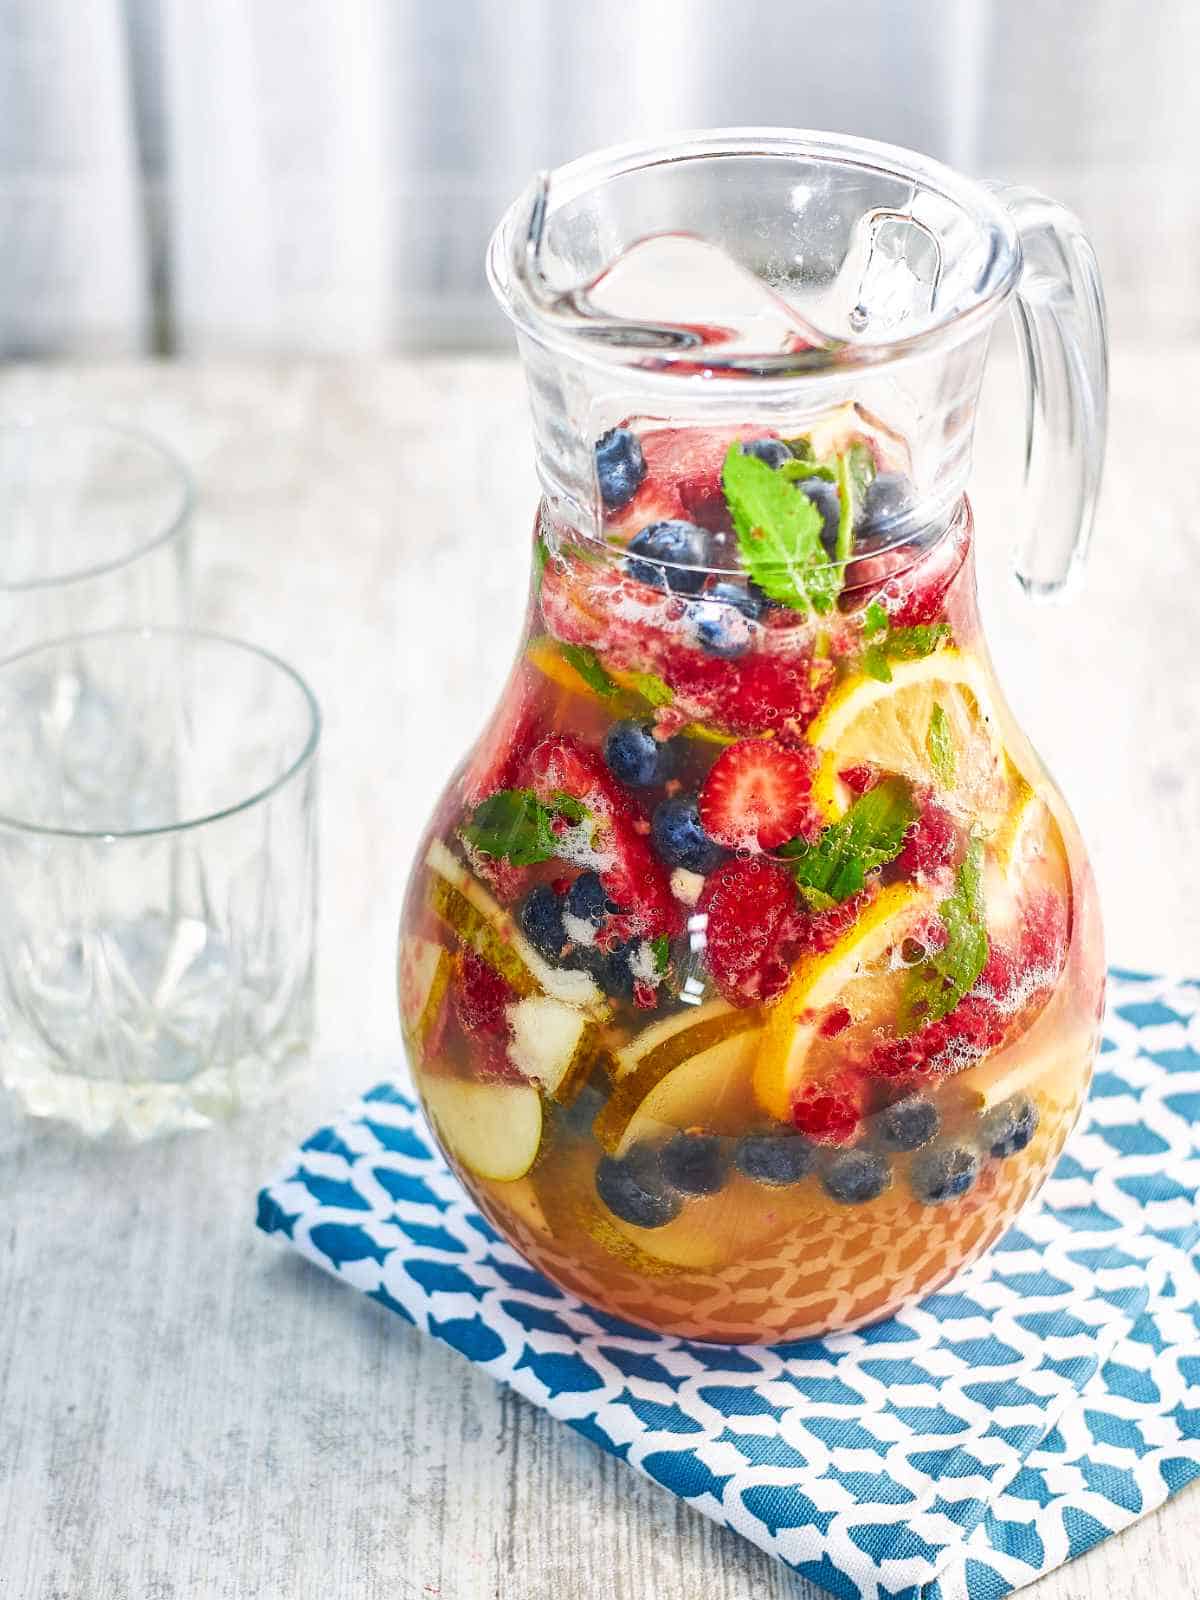 Pitcher of fruits and clear beverage.